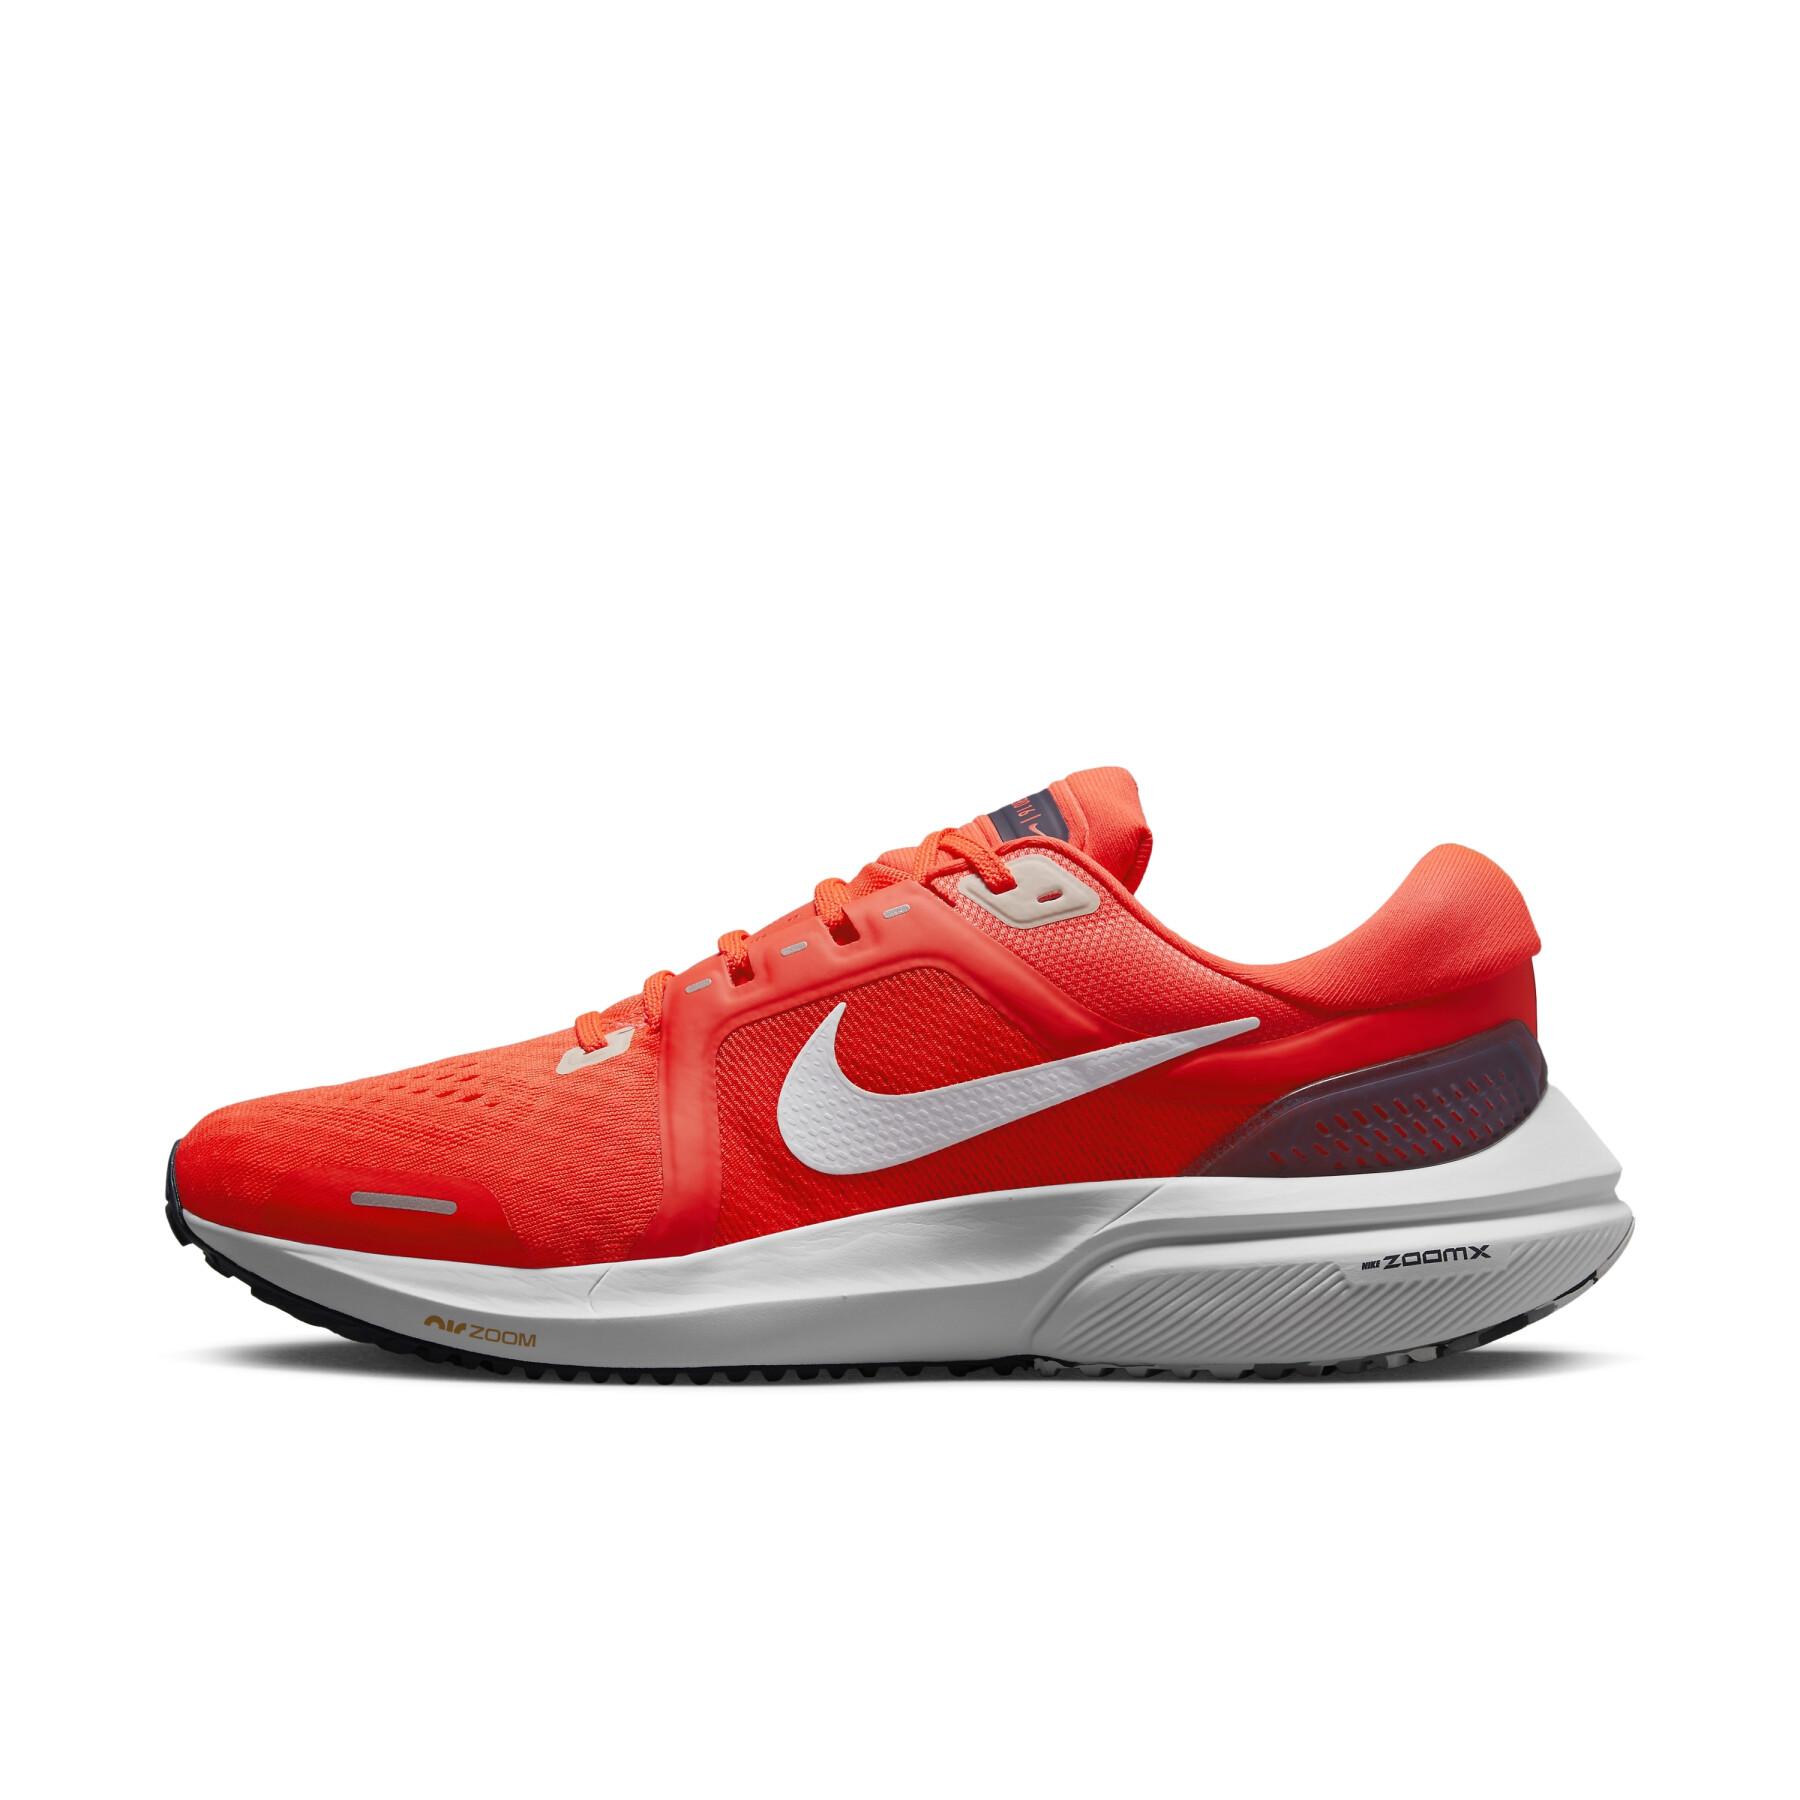 Shoes from running Nike Vomero 16